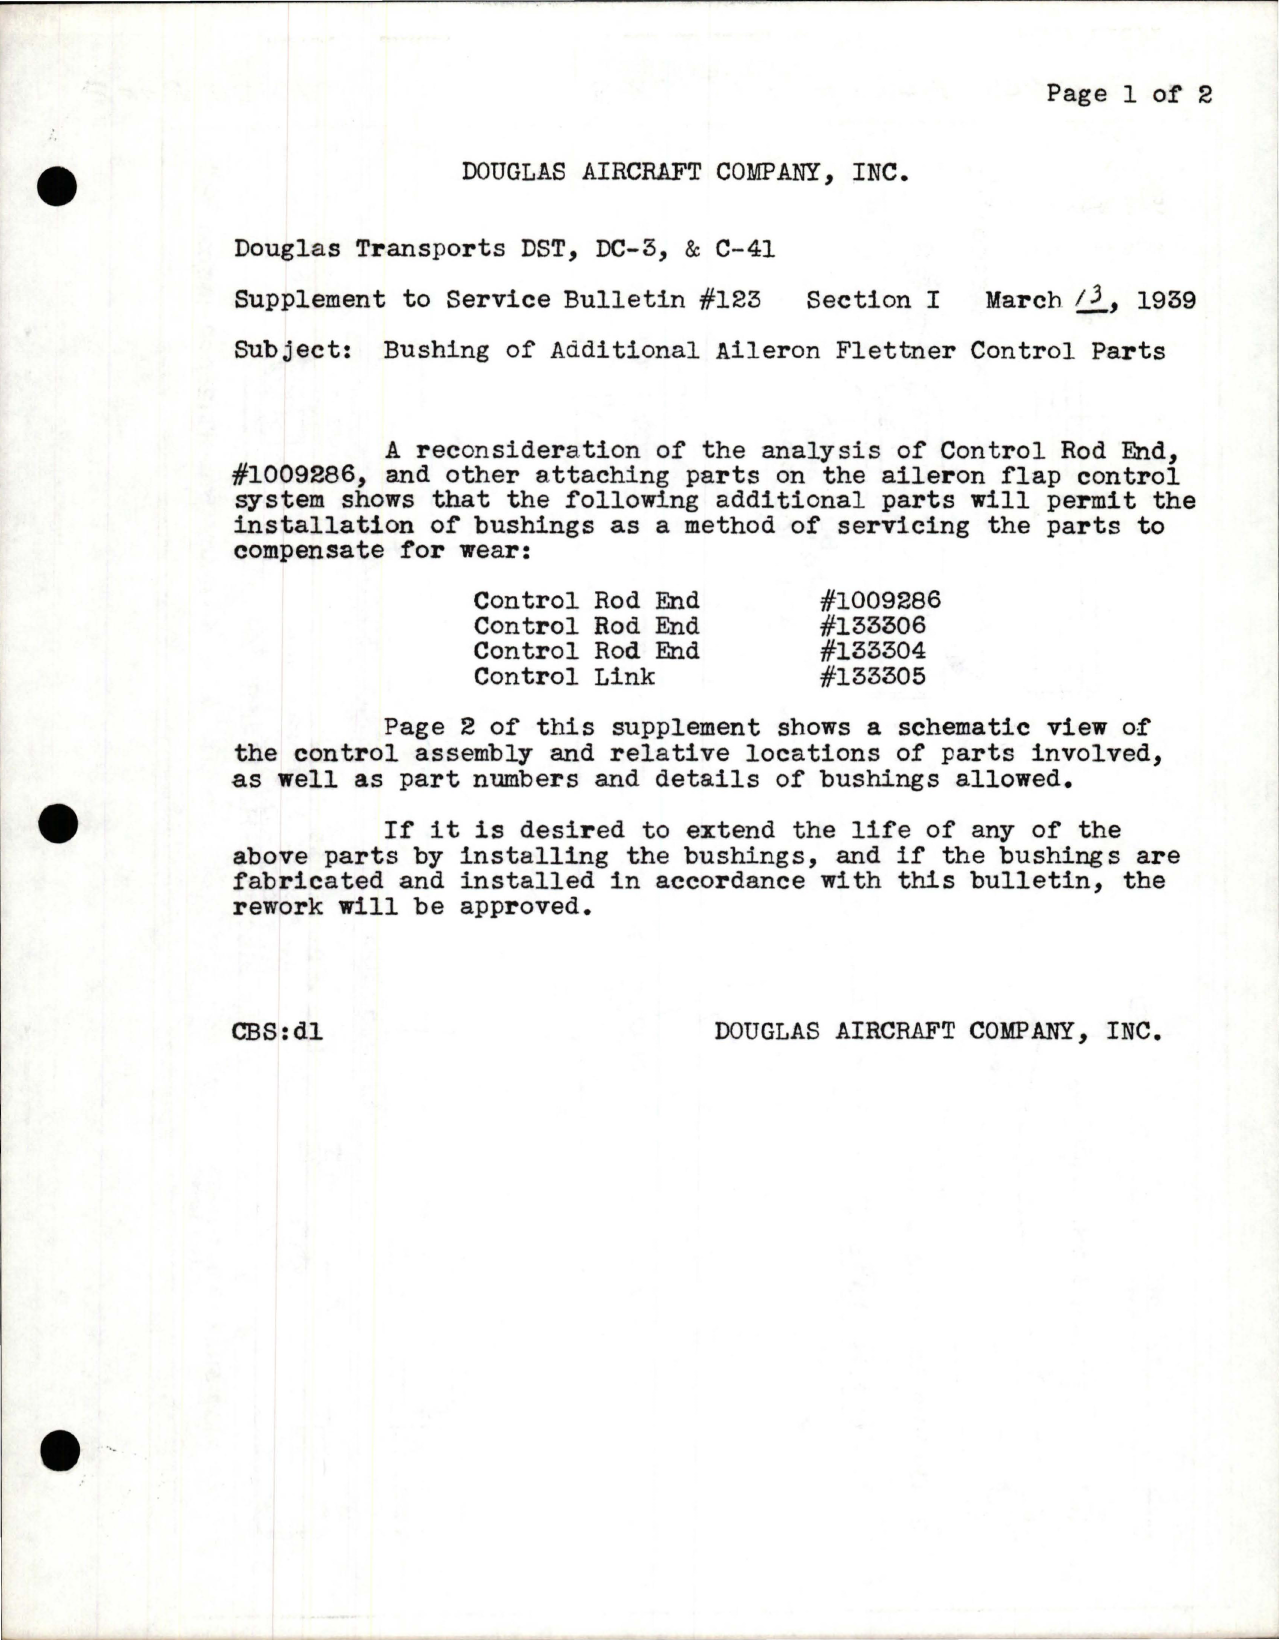 Sample page 1 from AirCorps Library document: Bushing of Additional Aileron Flettner Control Parts